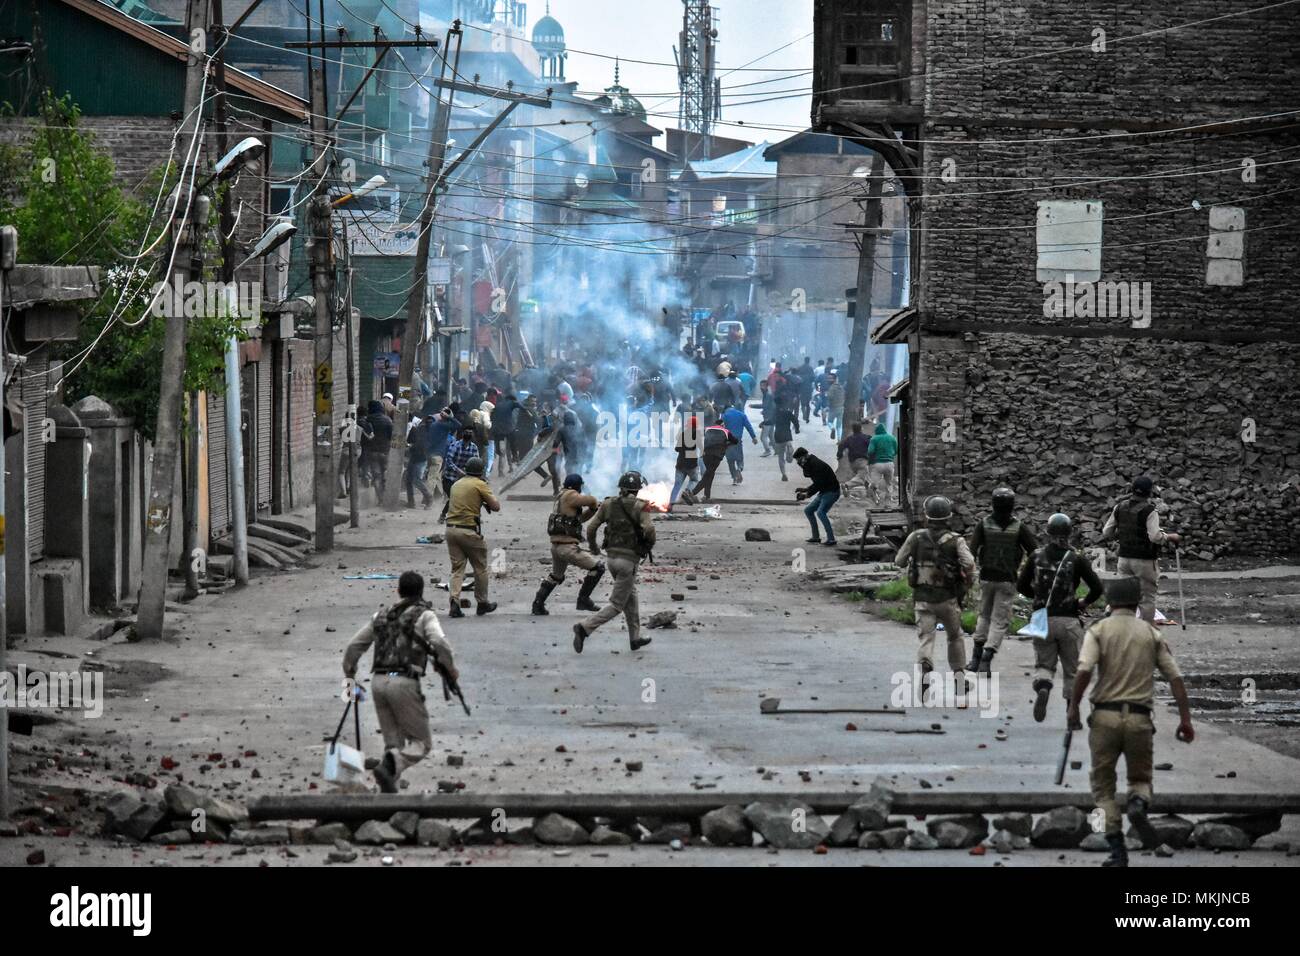 May 8, 2018 - Srinagar, J&K, India - Indian government forces chase Kashmiri protesters during clashes in Srinagar, Indian administered Kashmir. Fierce clashes broke out between government forces and Kashmiri protesters in Srinagar on Tuesday as the valley continued to remain tense over the killing of 11 people including 5 militants and 6 civilians in Indian administered Kashmir. Police used tear smoke shells and shot gun pellets to disperse hundreds of demonstrators who hurled rocks and chanted anti-Indian and pro-freedom slogans. Credit: Saqib Majeed/SOPA Images/ZUMA Wire/Alamy Live News Stock Photo